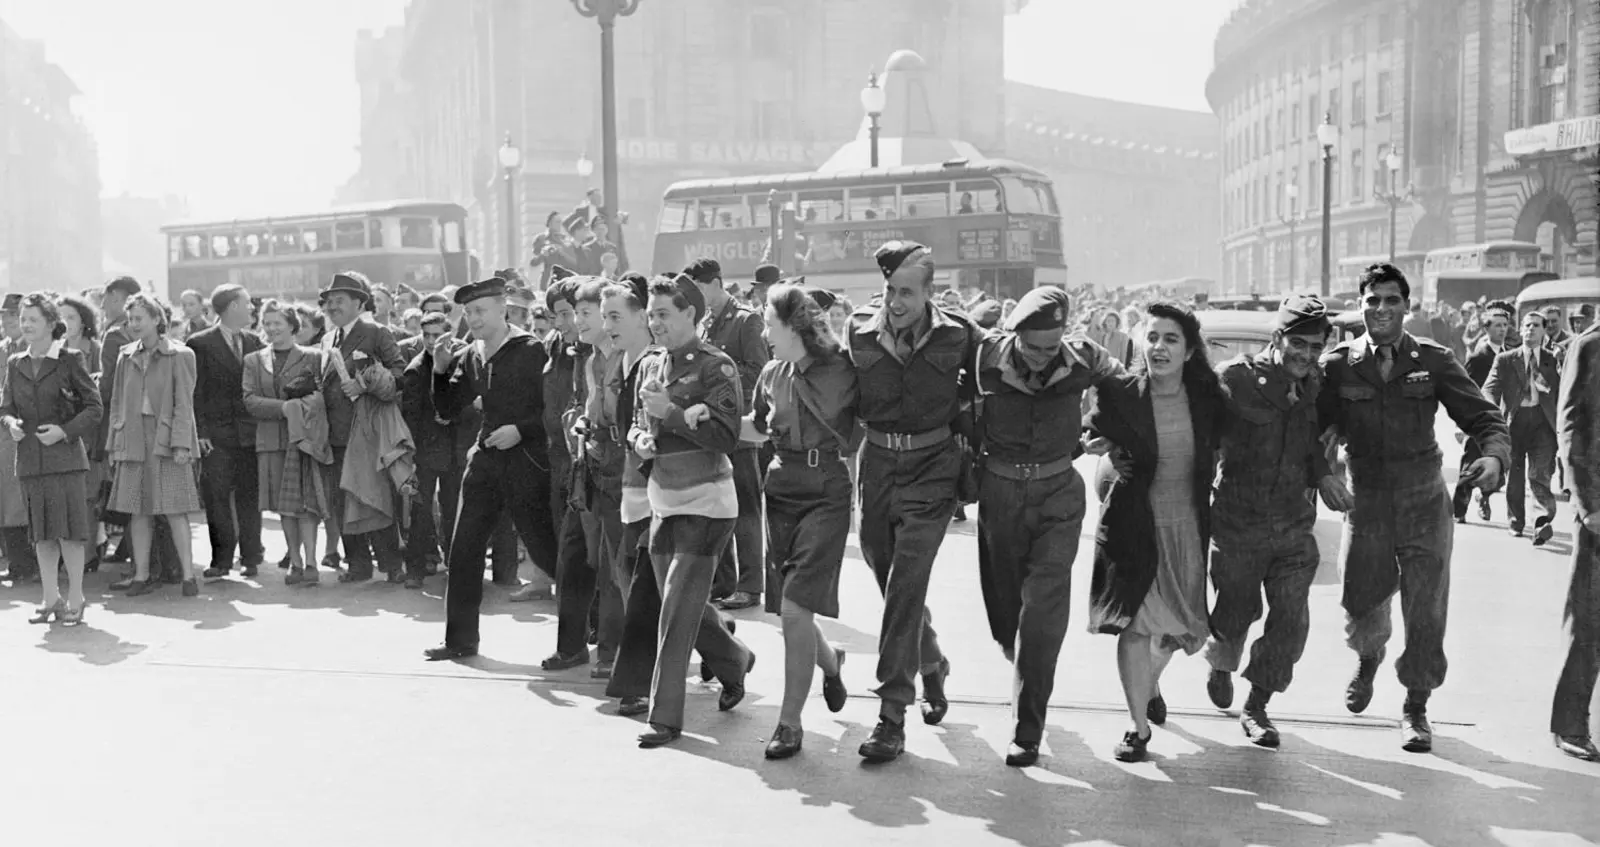 https://functions.rblcdn.co.uk/sitefinity/images/default-source/remembrance/coming-home/civilians-and-service-personnel-in-london-celebrate-the-news-of-allied-victory-over-japan-in-august-1945-iwm-(d-25636).jpg?sfvrsn=f29cb141_6&method=CropCropArguments&width=1600&height=847